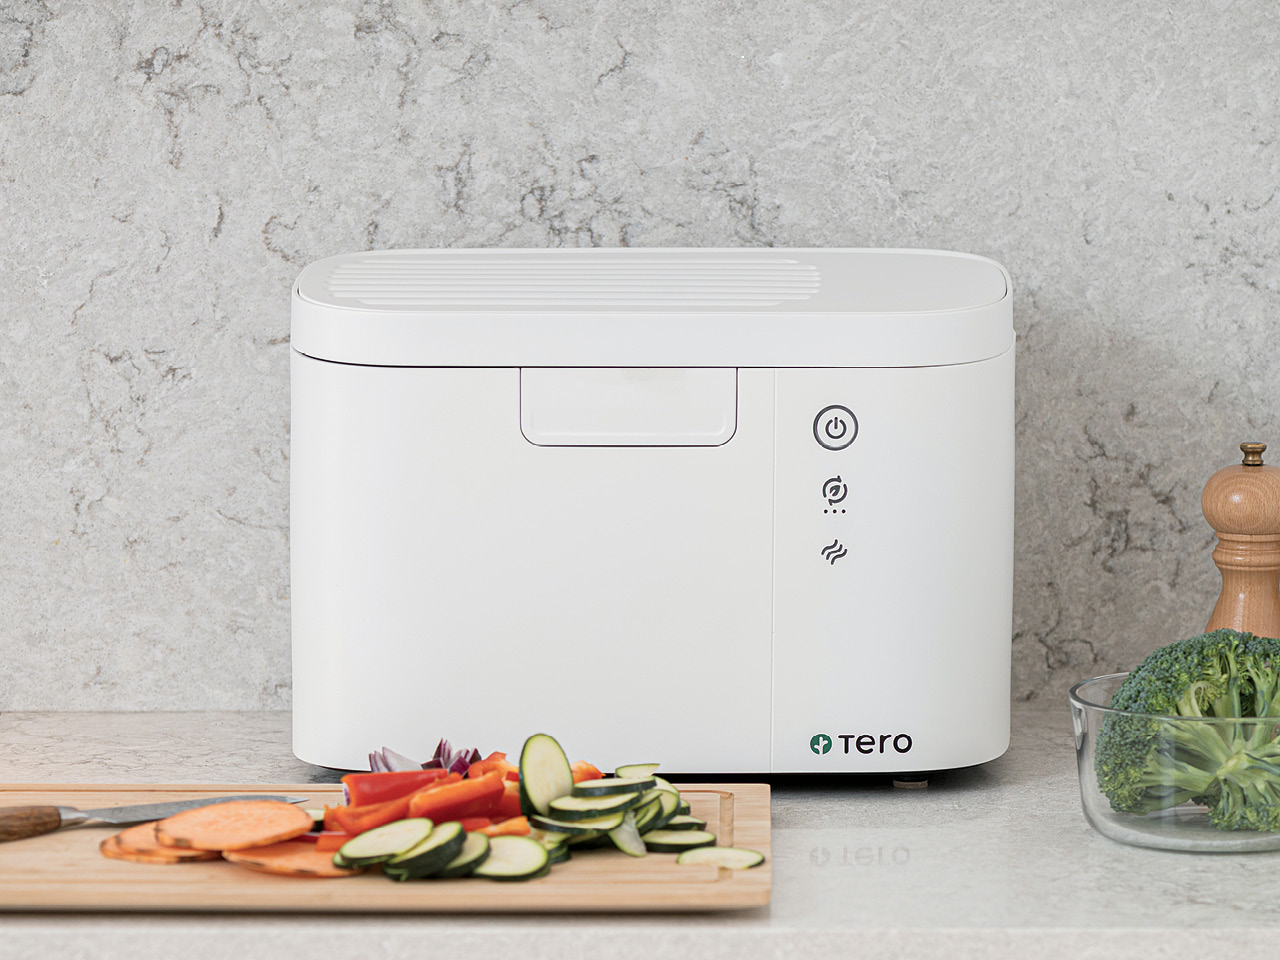 A white countertop composter from TERO positioned on a kitchen counter with sliced vegetables